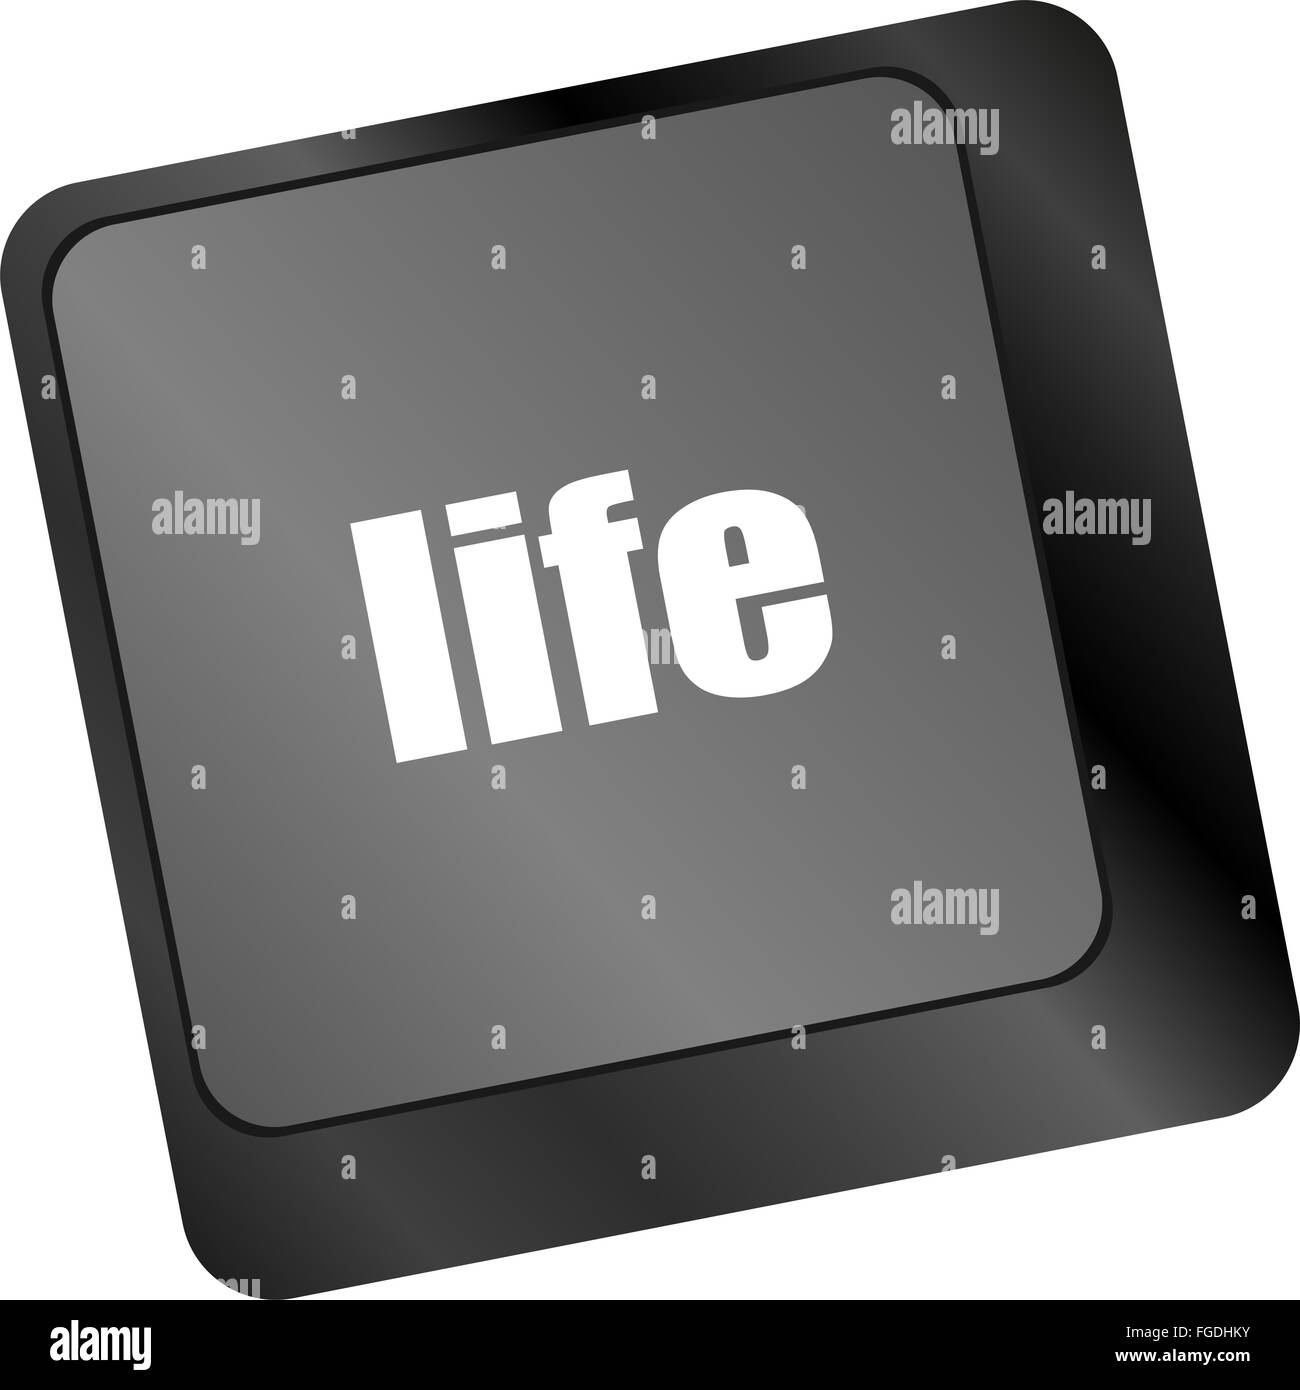 Life key in place of enter key - social concept Stock Photo